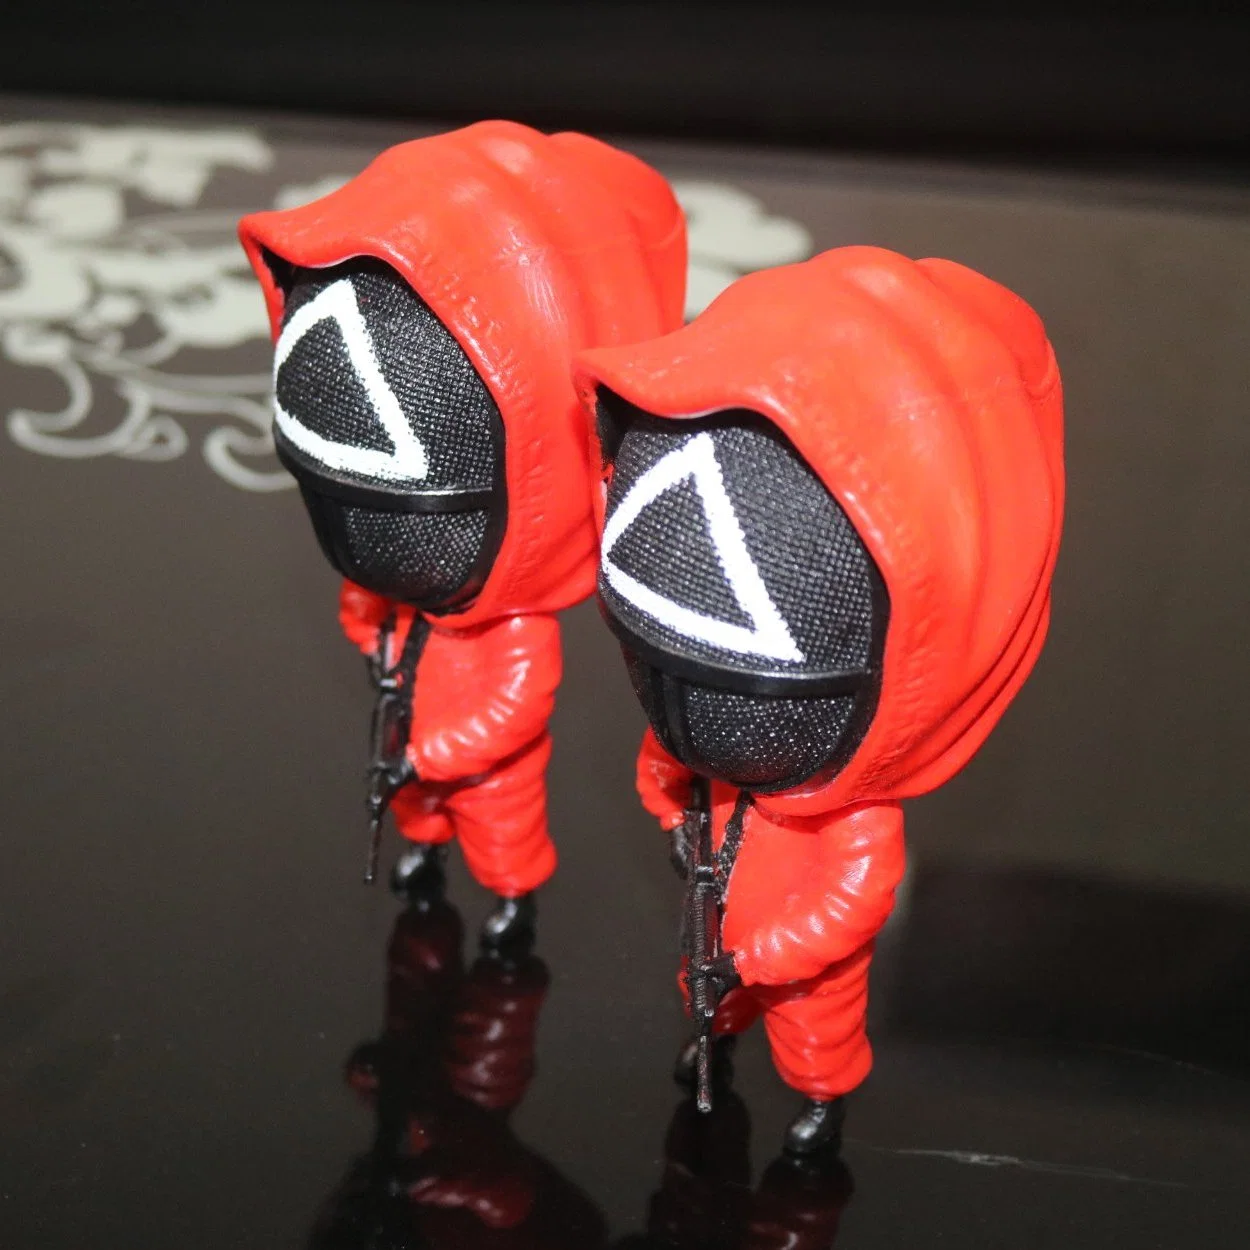 Customized Character Model SLA/SLS 3D Printing Service for Toy